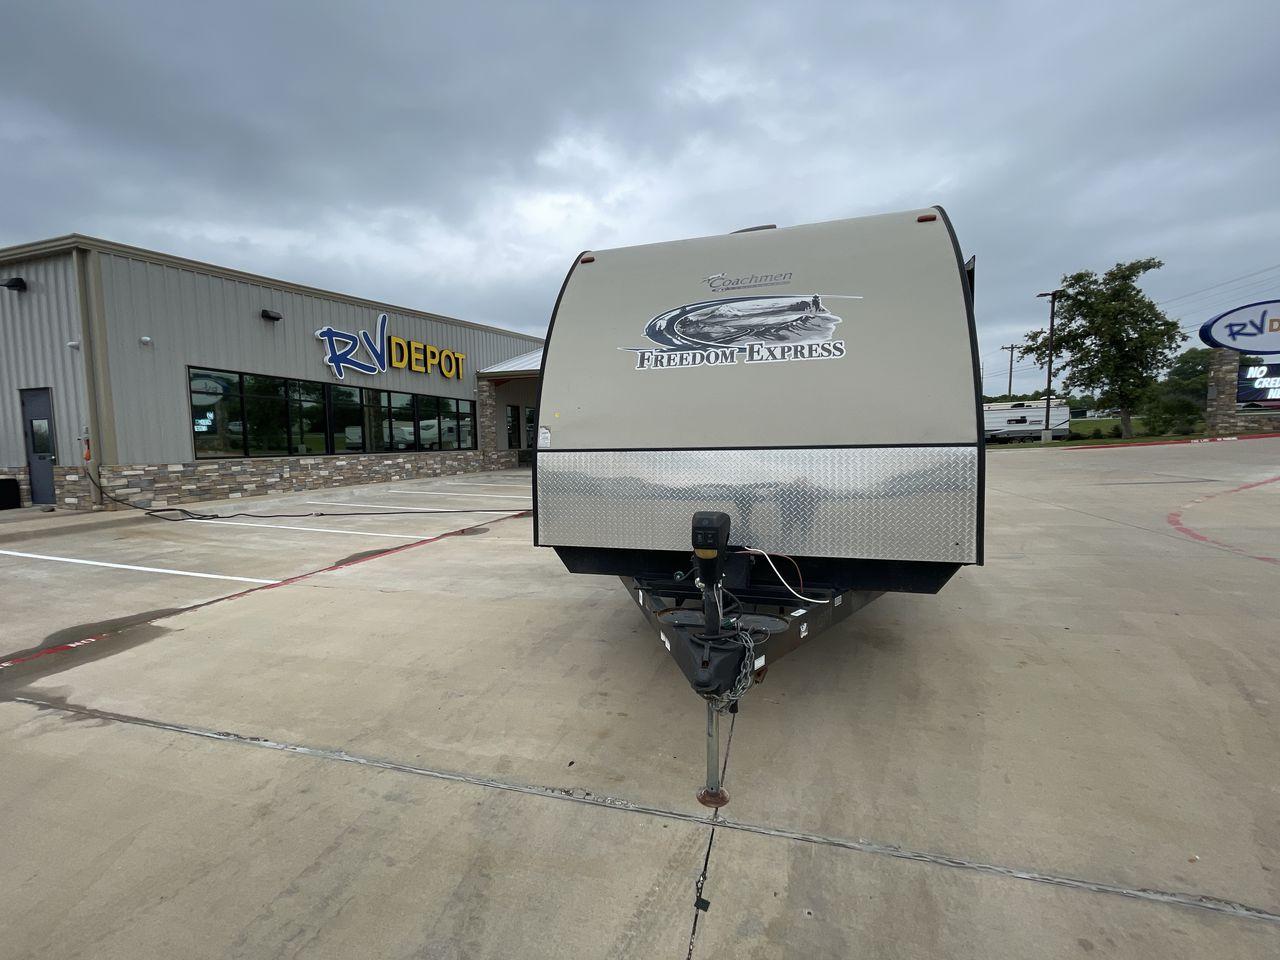 2015 TAN FREEDOM EXPRESS 305RKDS (5ZT2FEWB1FA) , Length: 34.5 ft. | Dry Weight: 6,199 lbs | Gross Weight: 9,500 lbs. | Slides: 2 transmission, located at 4319 N Main St, Cleburne, TX, 76033, (817) 678-5133, 32.385960, -97.391212 - The 2015 Freedom Express 305RKDS is a travel trailer designed to deliver an exceptional camping experience, combining freedom and comfort in every detail. It boasts a rear kitchen layout, providing a unique and functional living space. The rear kitchen is equipped with high-end appliances, ample cou - Photo #0